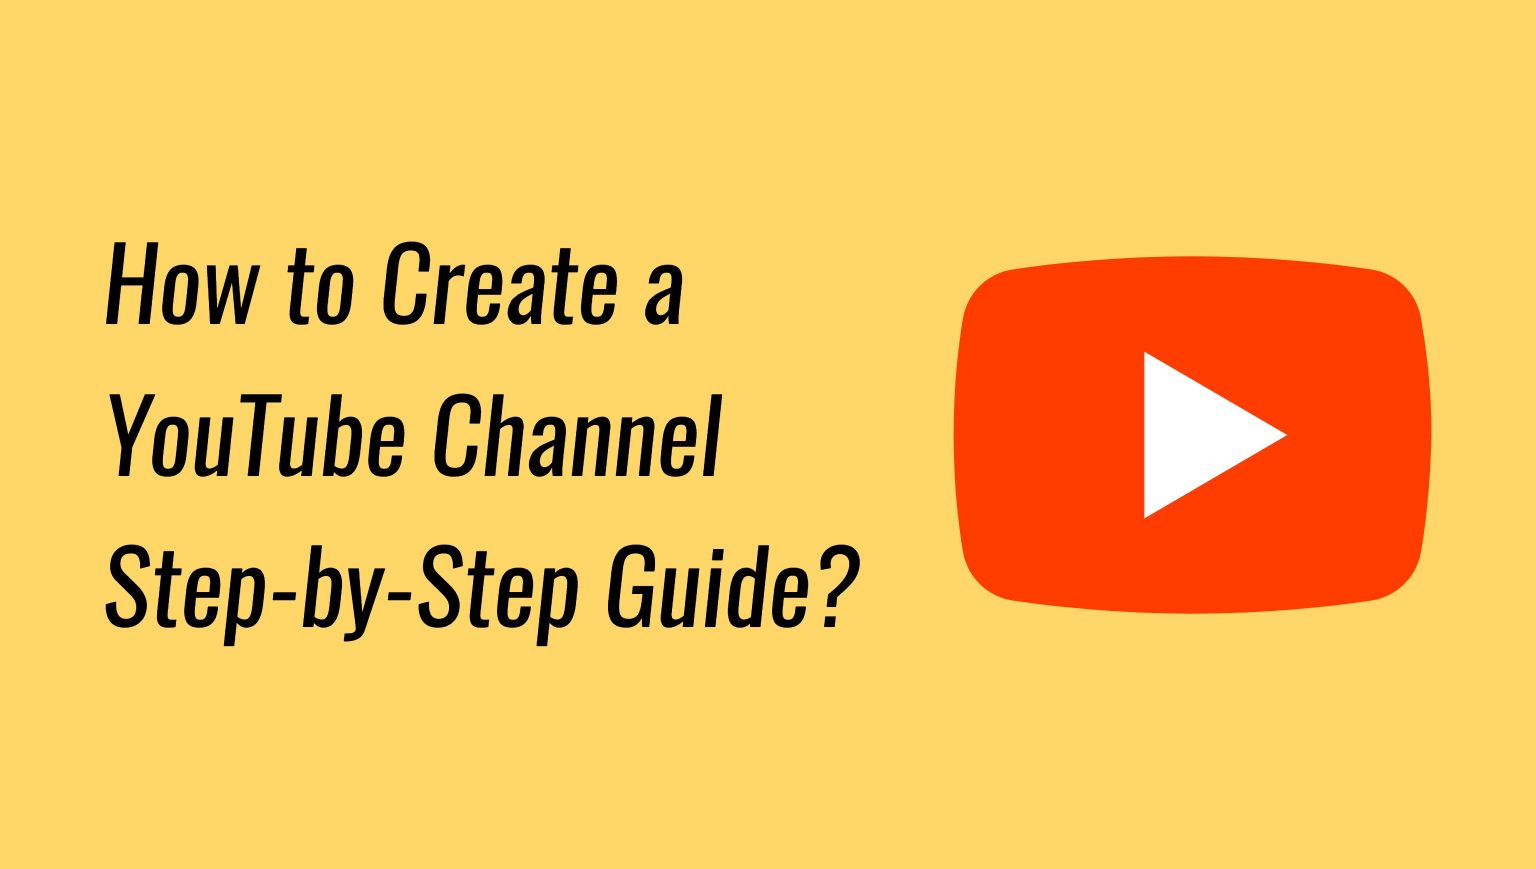 How to Create a YouTube Channel Step by Step Guide?